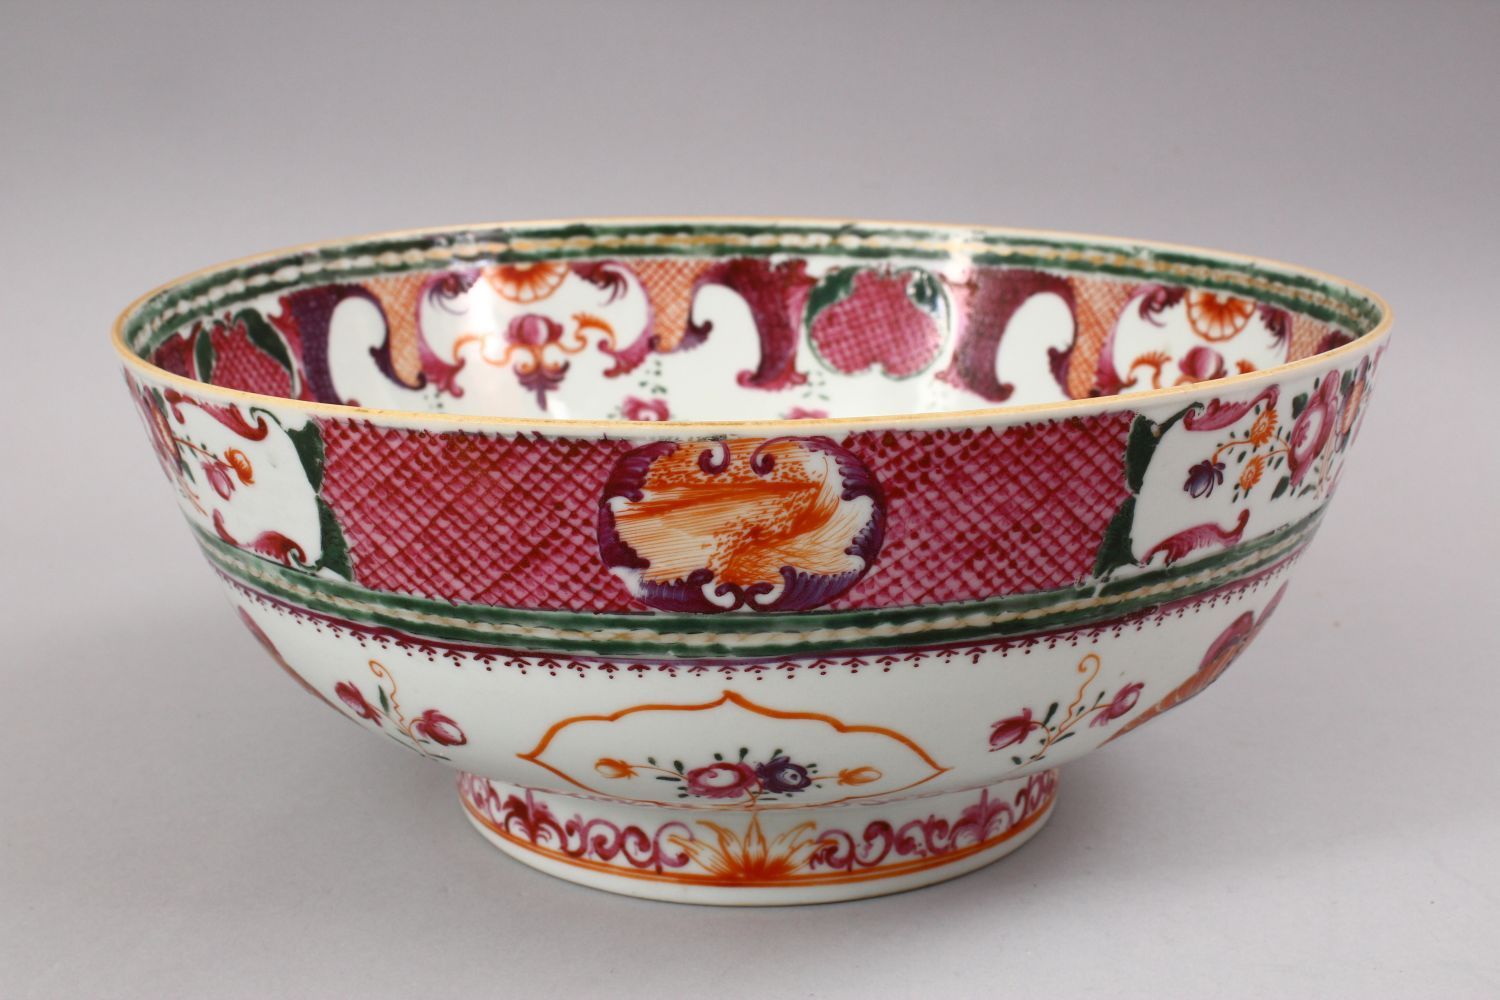 A GOOD 18TH CENTURY CHINESE QIANLONG MANDARIN PORCELAIN BOWL, decorated with scenes of flora and - Image 3 of 6